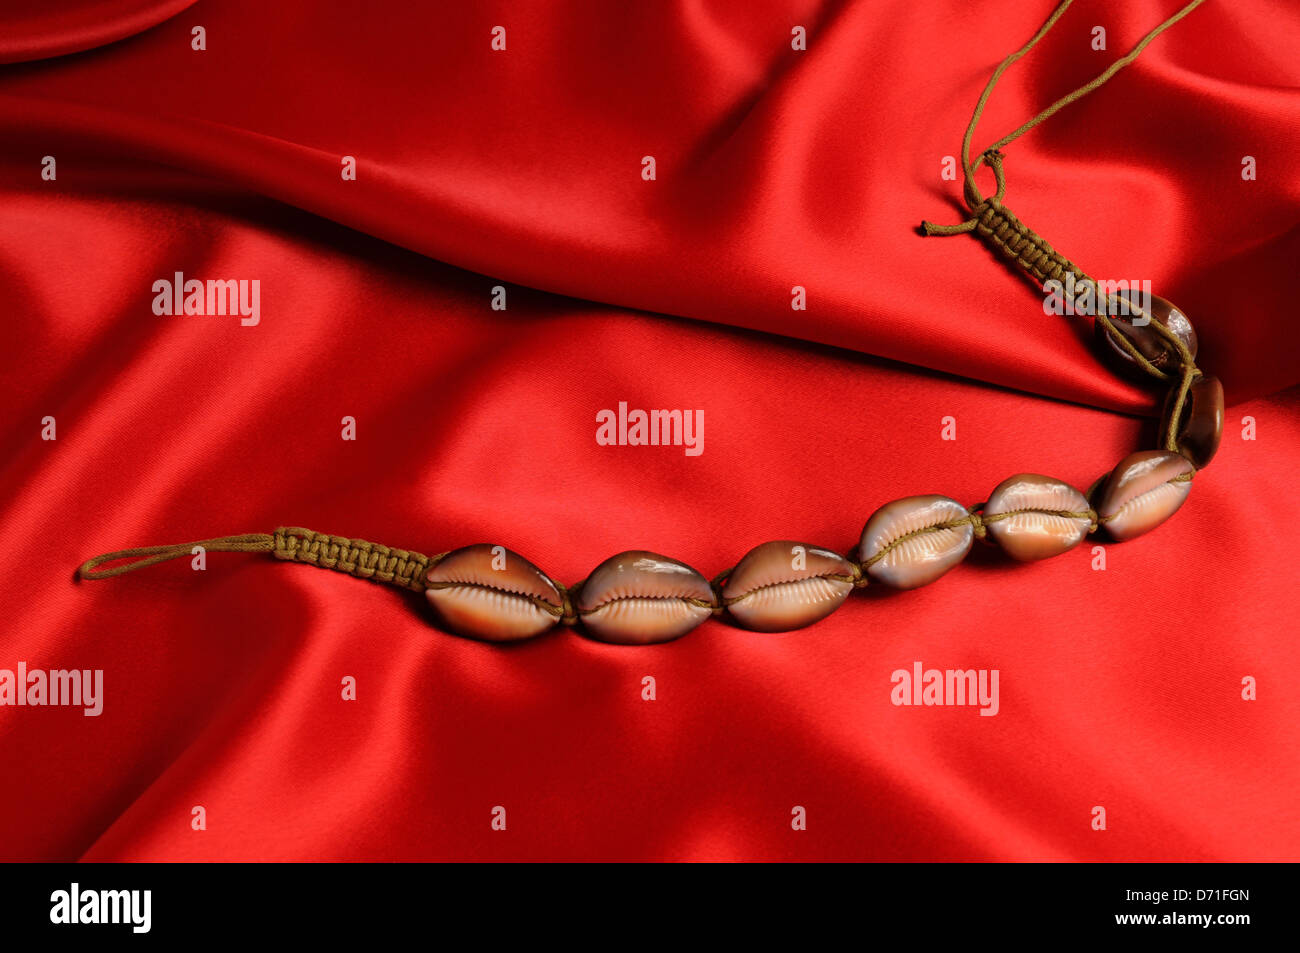 Shells necklace on red satin background. Stock Photo